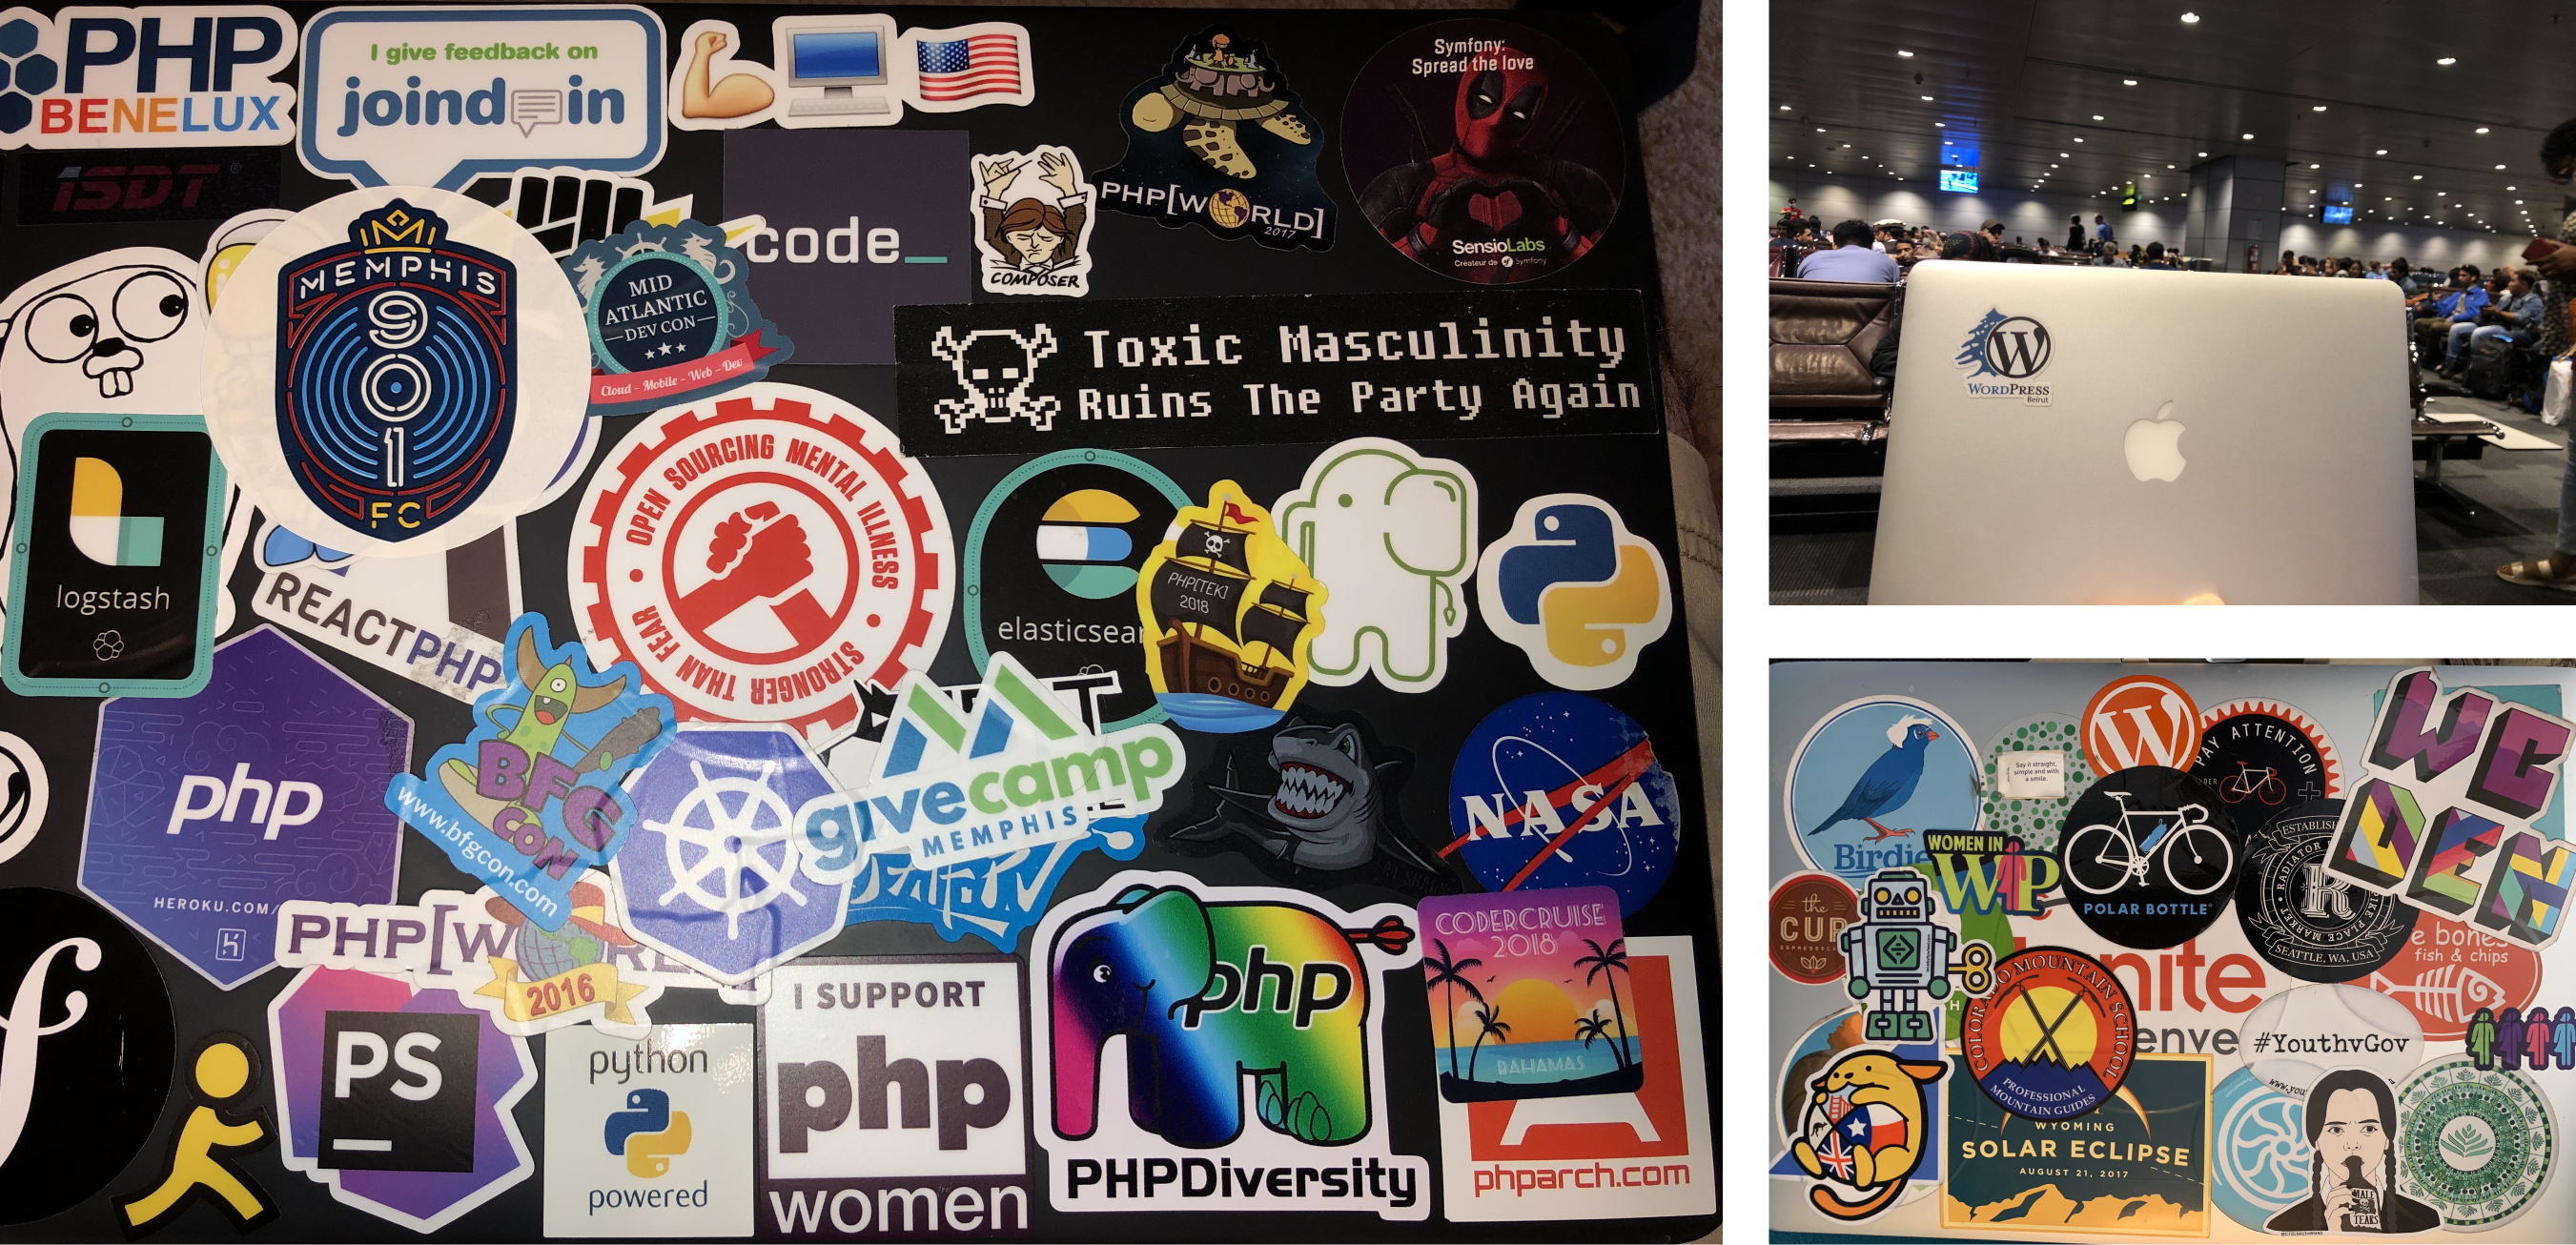 People love to cover their laptops in stickers in the WordPress community especially.